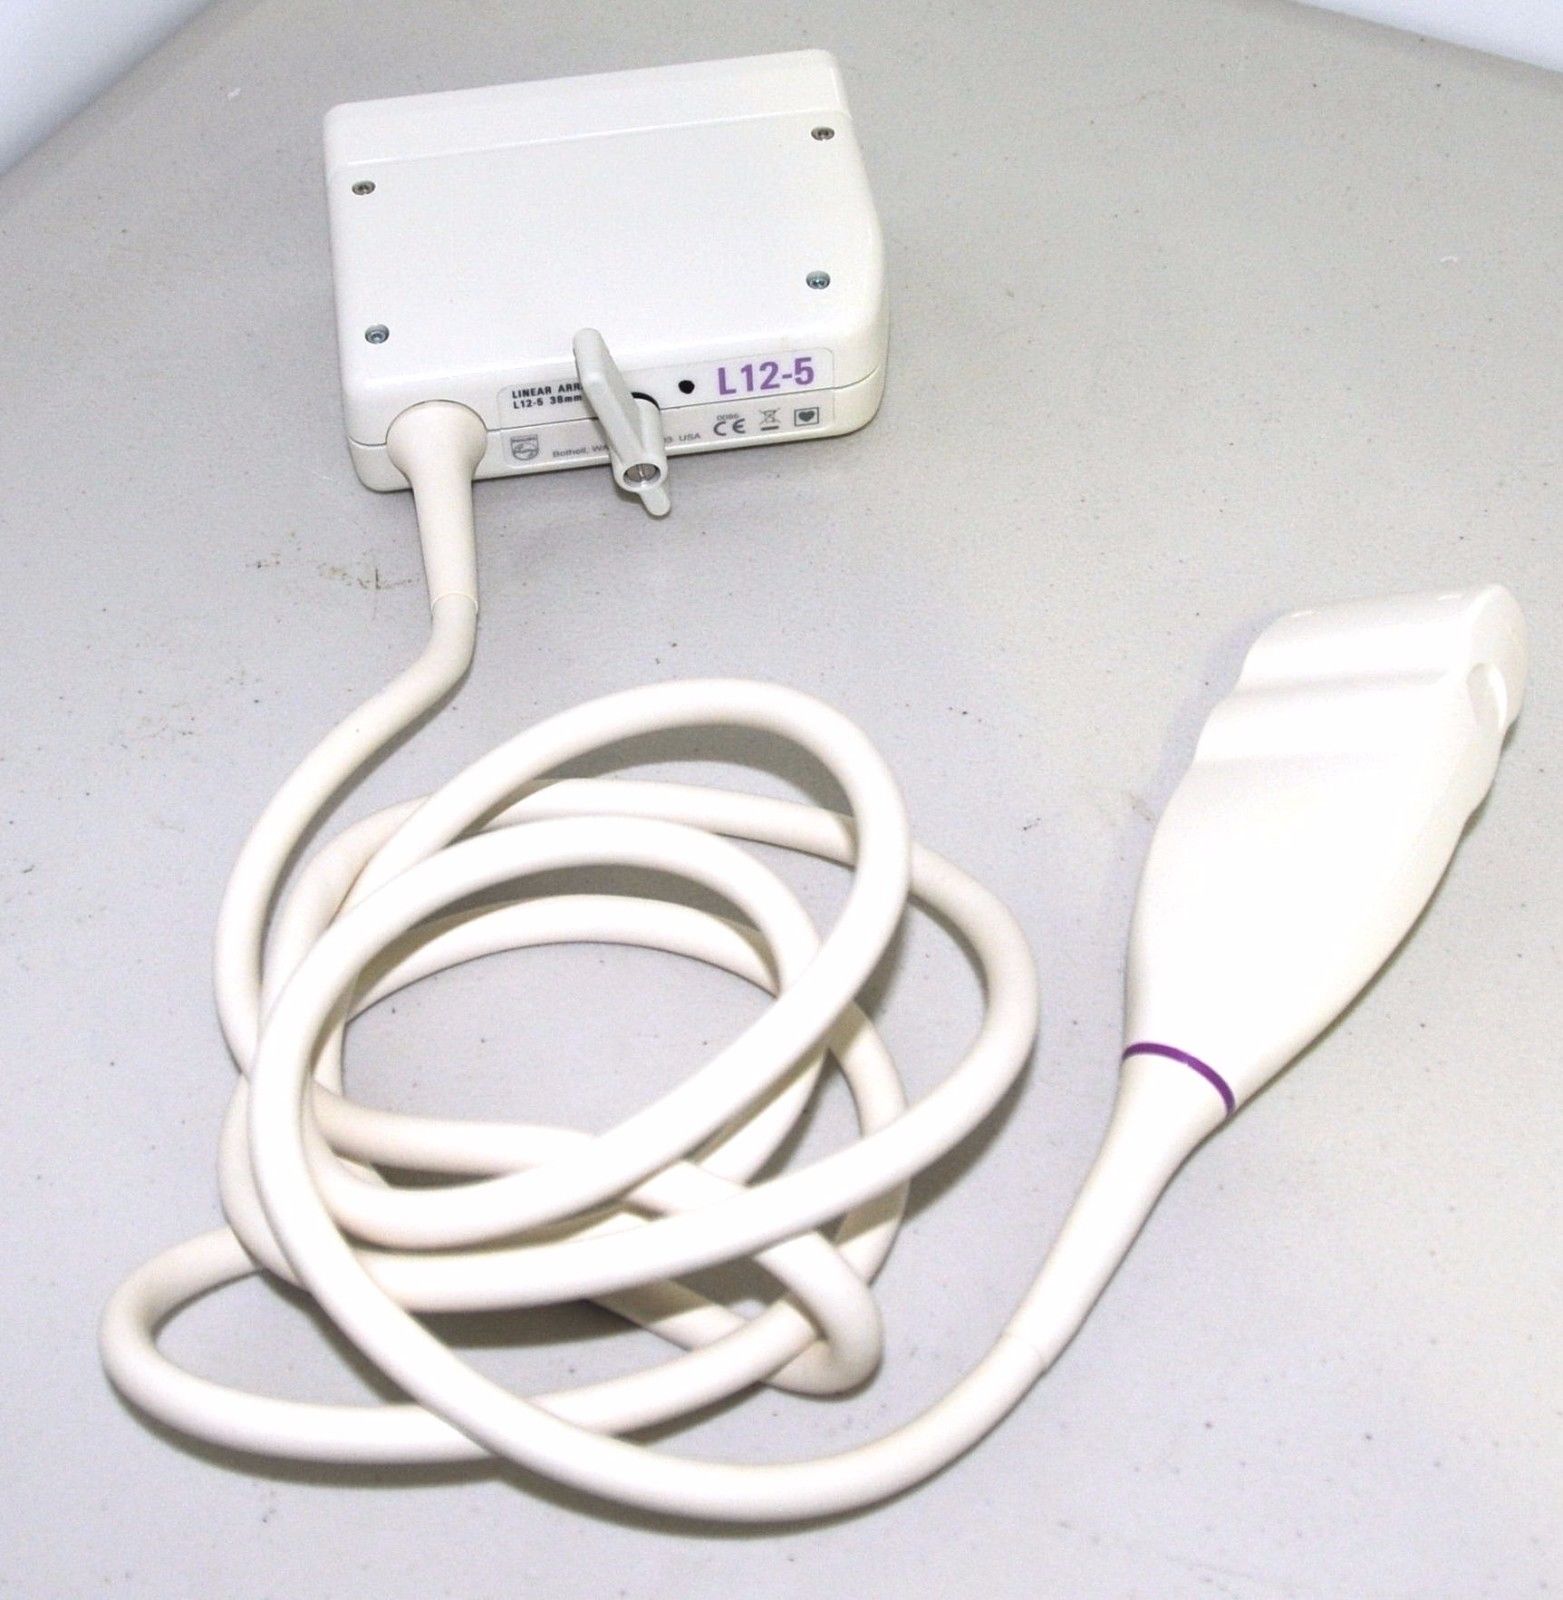 Philips ATL Ultrasound Probe, Transducer L 12-5 Linear Array 38mm #2 DIAGNOSTIC ULTRASOUND MACHINES FOR SALE